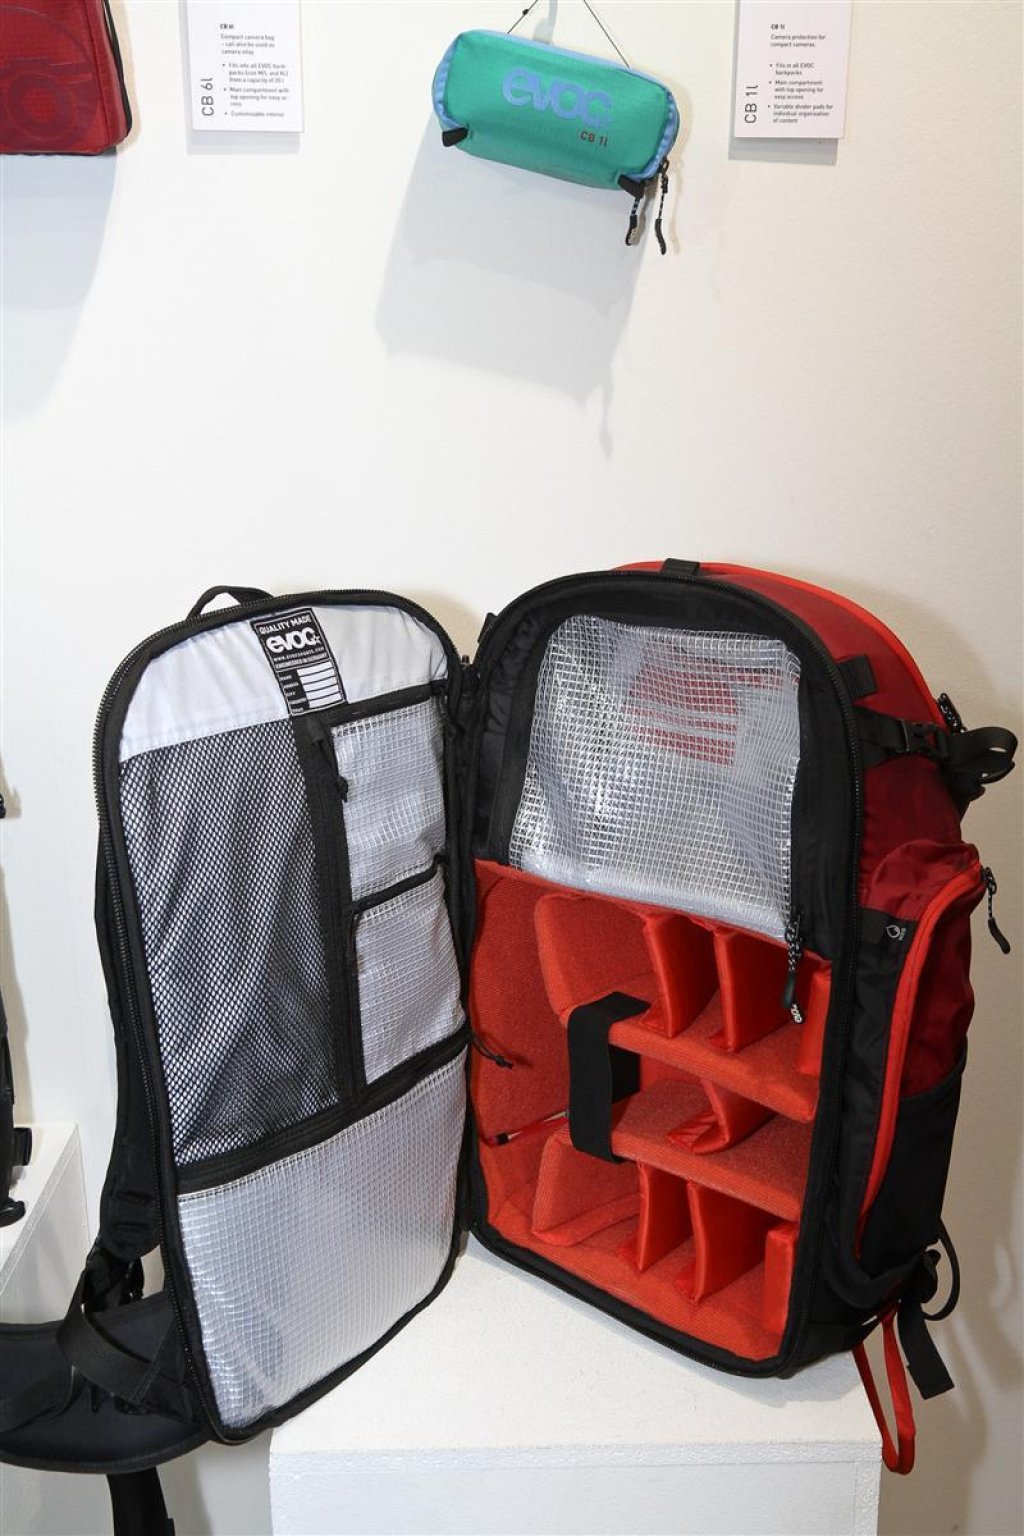 The EVOC CP 26L. Separate camera and main compartment, side camera access, handy size and everything the freerider needs make this photo backpack extremely interesting